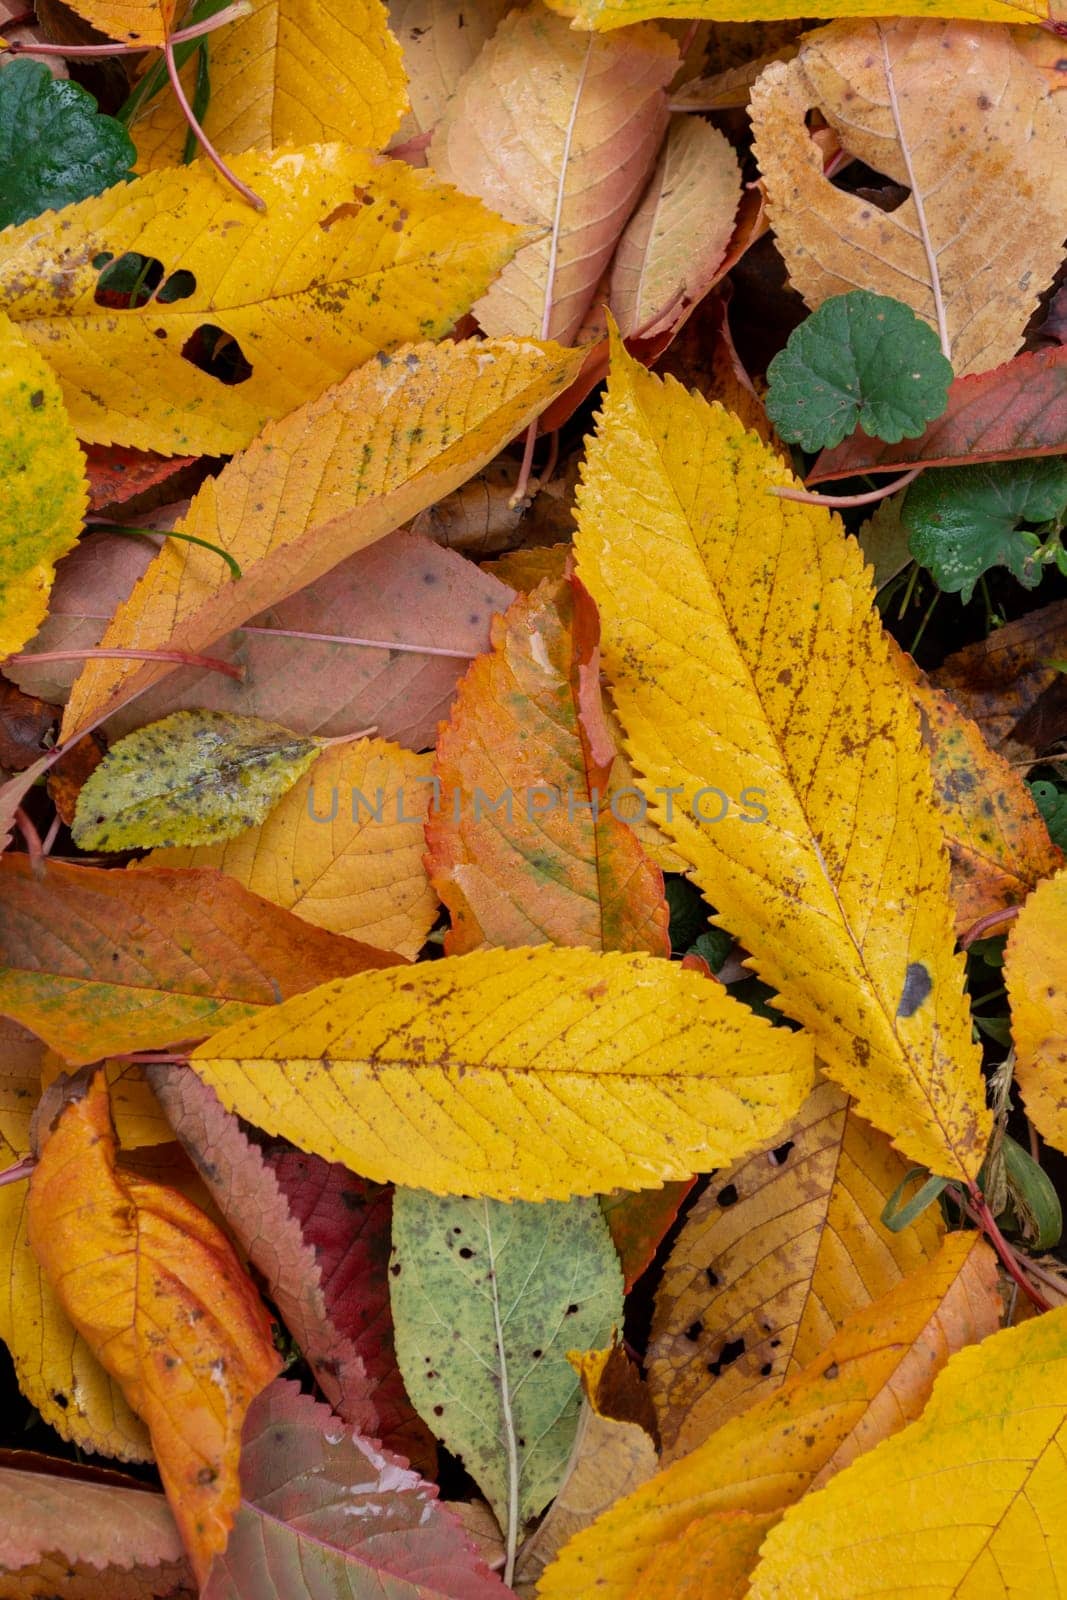 Autumn colorful fallen leaves on the ground in the garden, cherry foliage. Top view. Vertical background. Backdrop